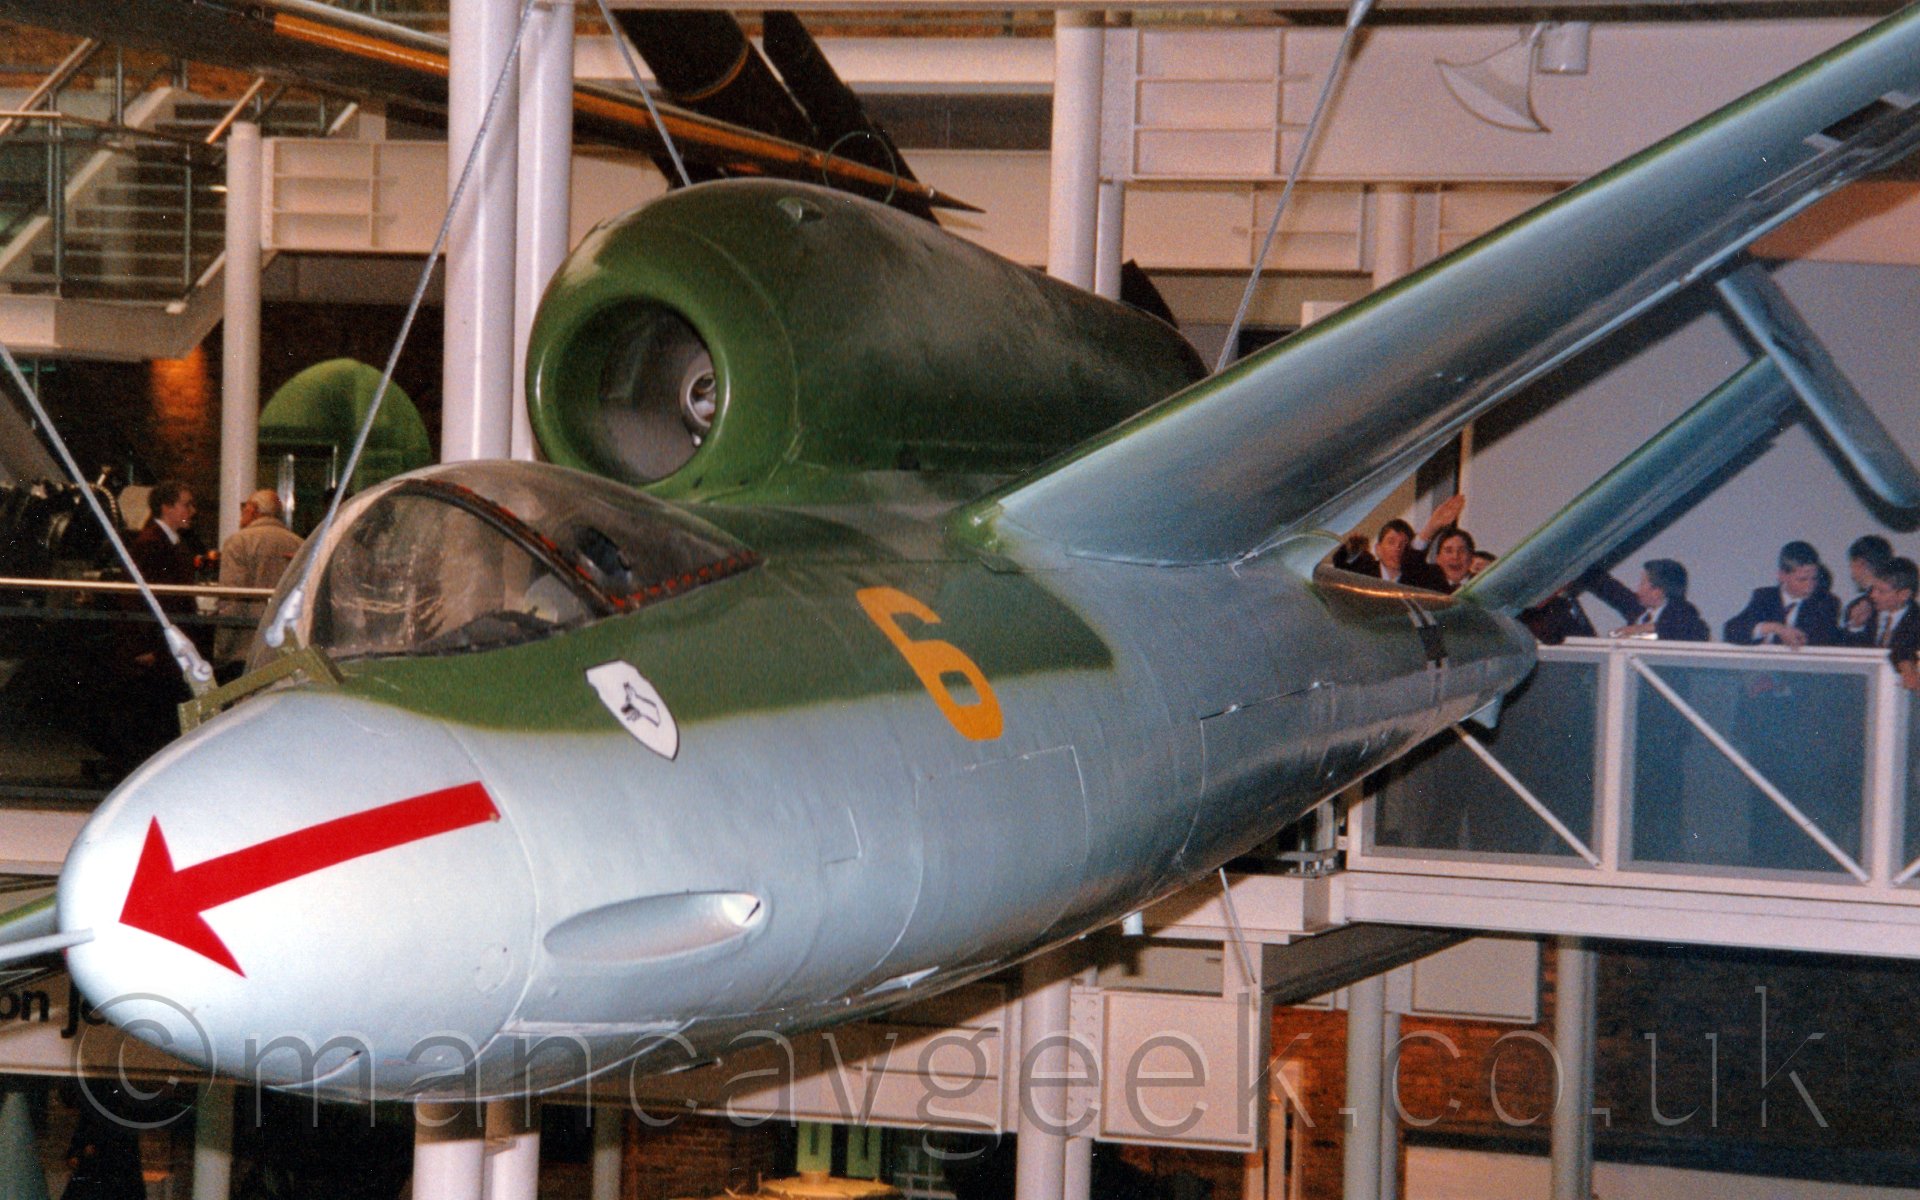 |Feront view of a single engined jet fighter aircraft, displayed haning from the roof of a museum, slightly tilted as if flying at an angle. the plane has a sky blue lower body and underside of the winge, while the upper surfaces, includigng the engine, are olive green. There is a long red arrow pointing directly forwards on the nose, and a large yellow number 6 under the rear of the cockpit. In the background, there are several levels of the museum, with a group of schoolboys milling around on the balcony opposite.